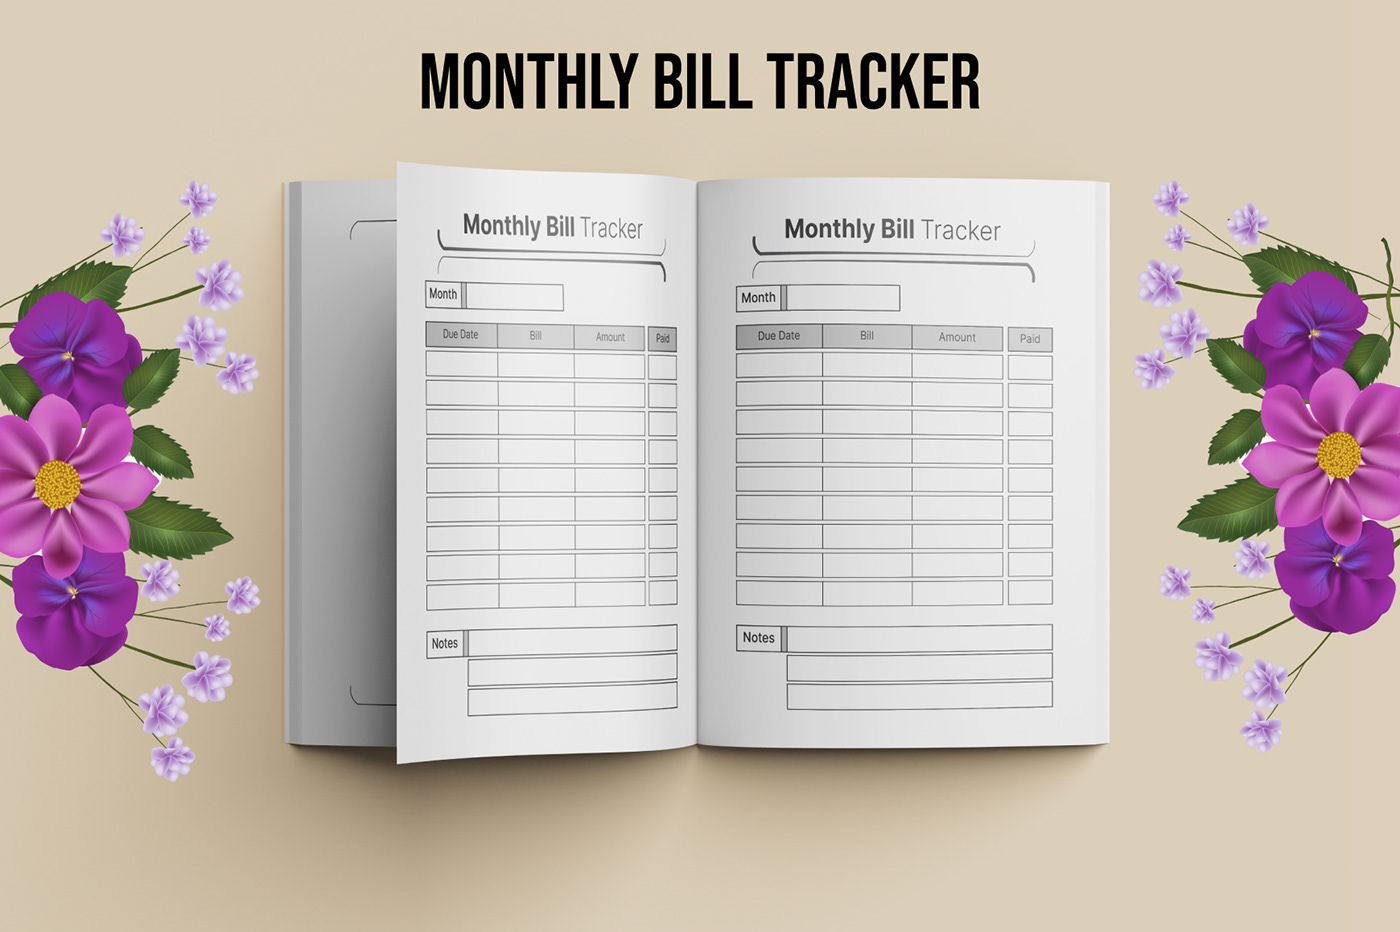 Amazon book cover Diary kdp amazon kdp interiors KDP Publishing Monthly Bill Tracker no content publishing  